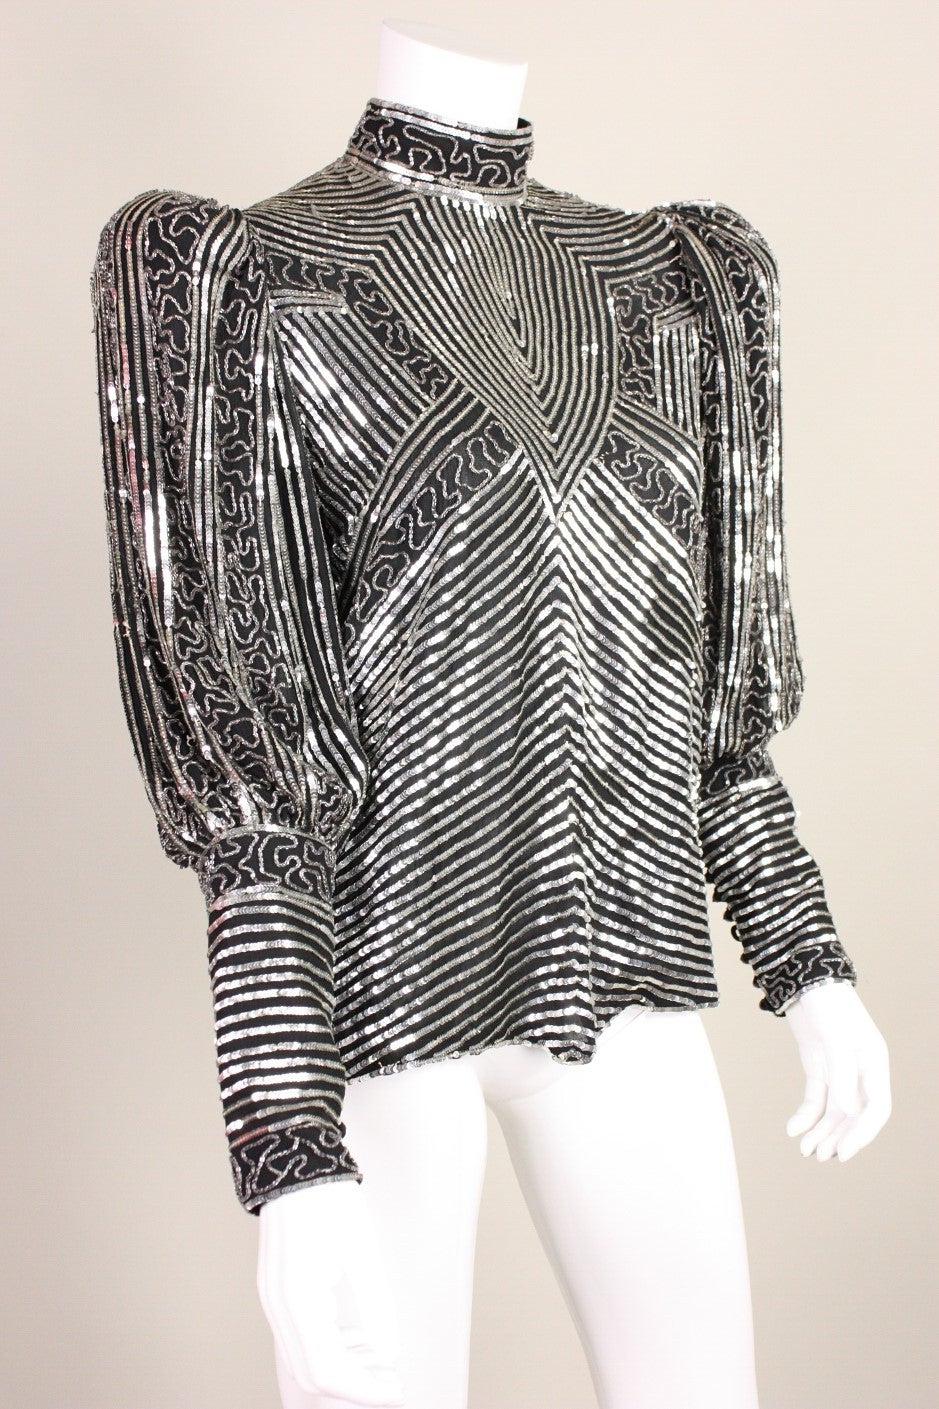 Vintage blouse is made of black silk and covered in silver sequins and bugle beads.  Mock neck.  Exaggerated shoulders created with shoulder pads.  Sleeves button up the forearm with looped closure.  Center back same closure.
Lined.

Labeled size